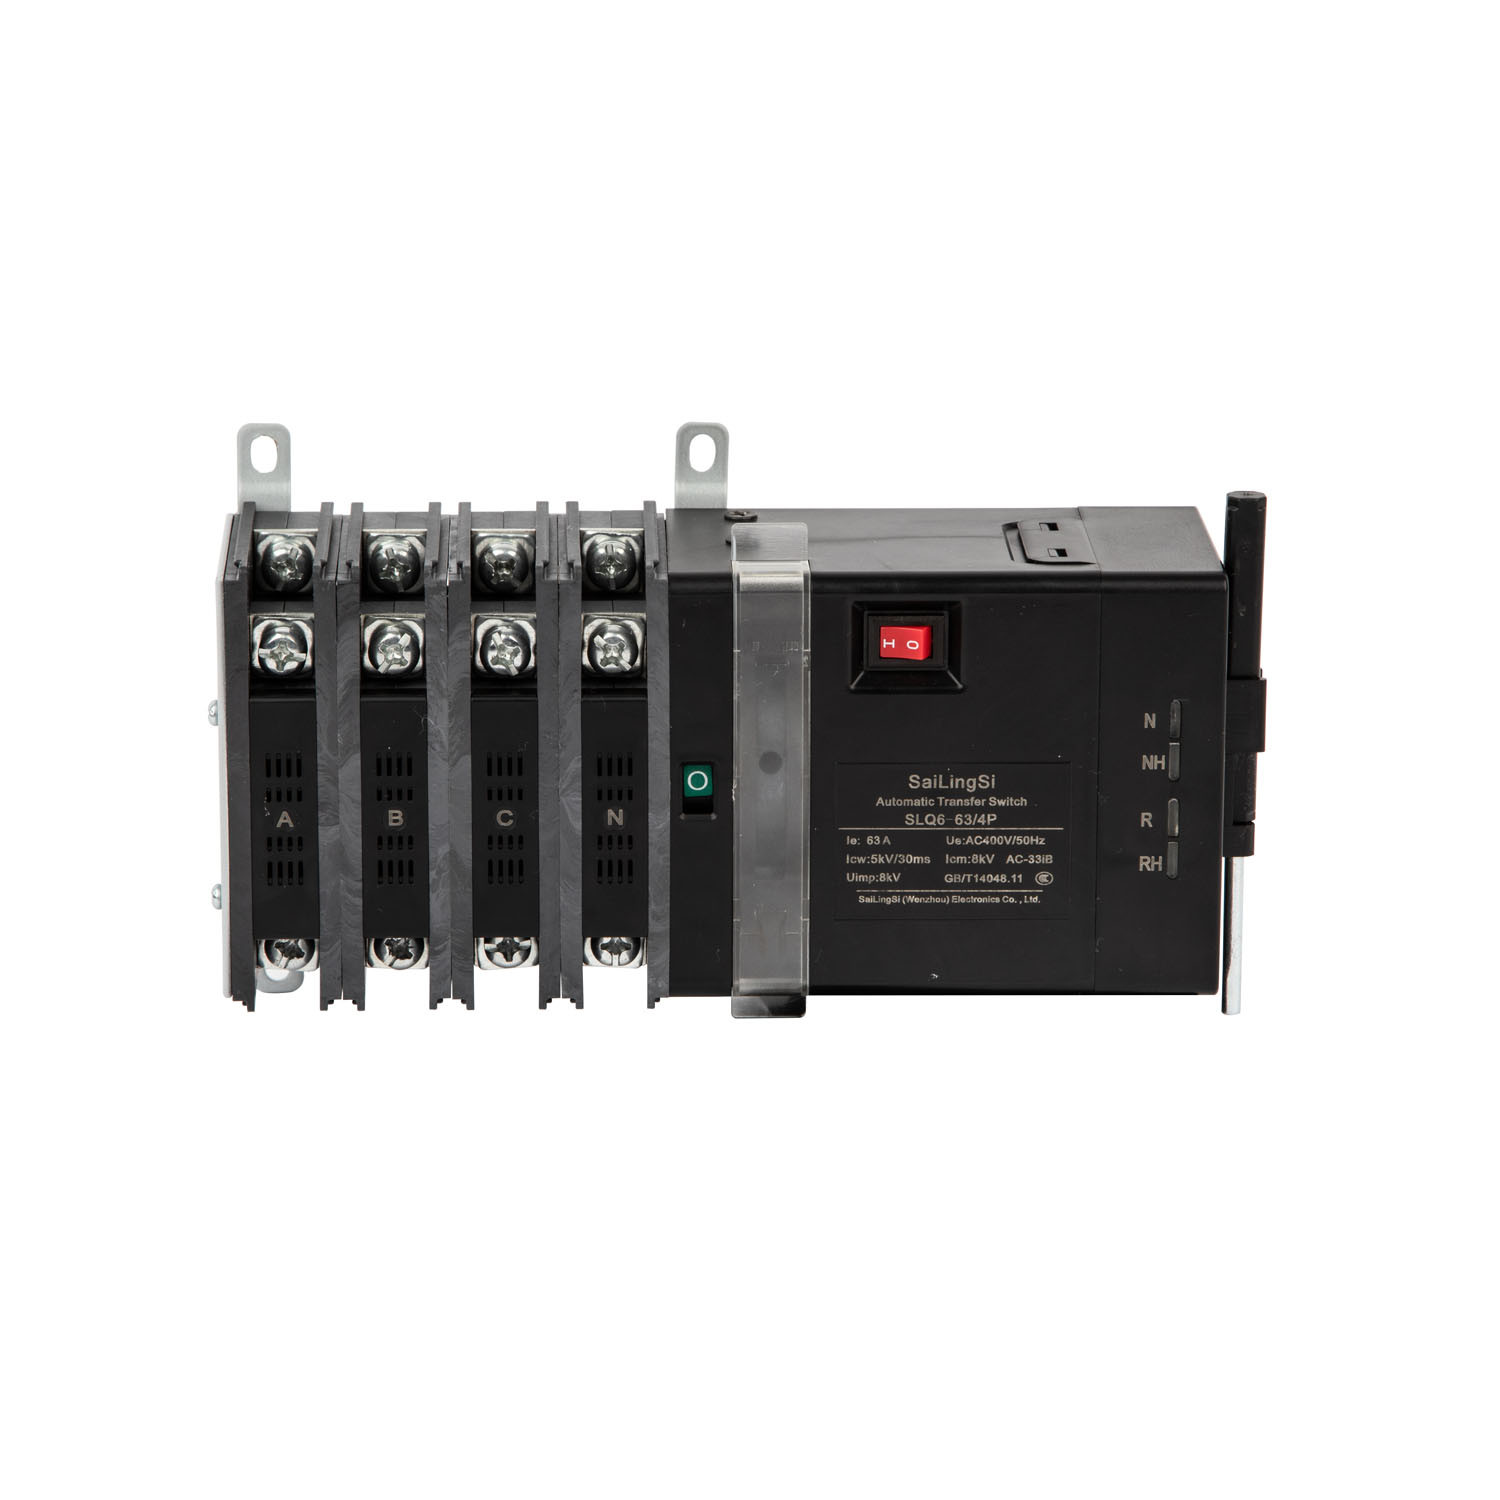 Solar Power to City Power ATS 125A 2p Automatic Transfer Switch ATS with Fire Control